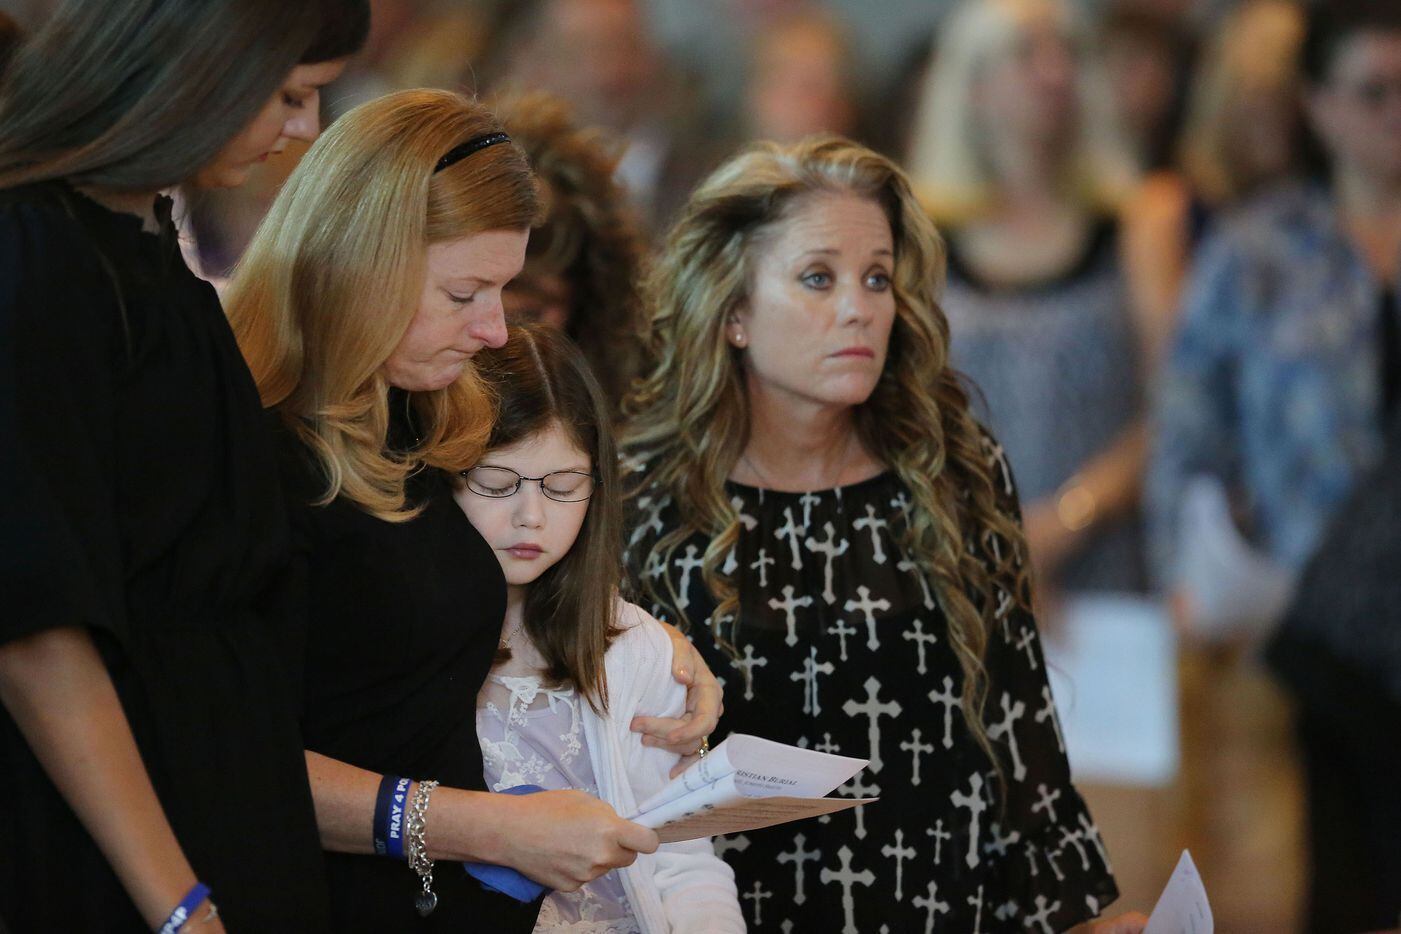 Heidi Smith (second to left) stands between her daughters, Victoria (left) and Caroline Smith (center), with Dallas Sr. Cpl. Marcie St. John (right) standing nearby during the funeral for her husband, Dallas police sergeant Michael Smith.